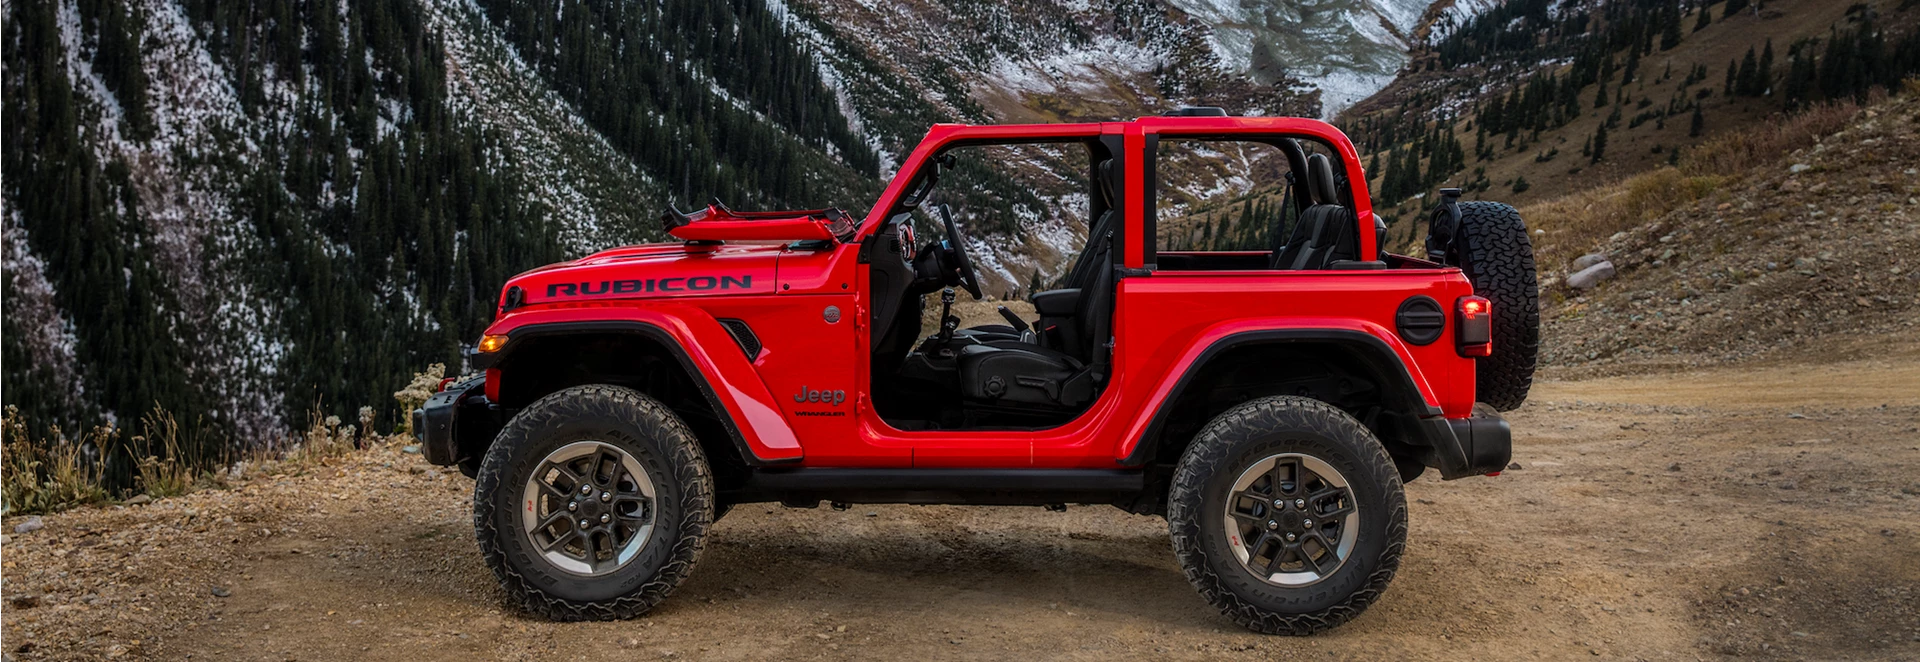 Prices announced for 2019 Jeep Wrangler 